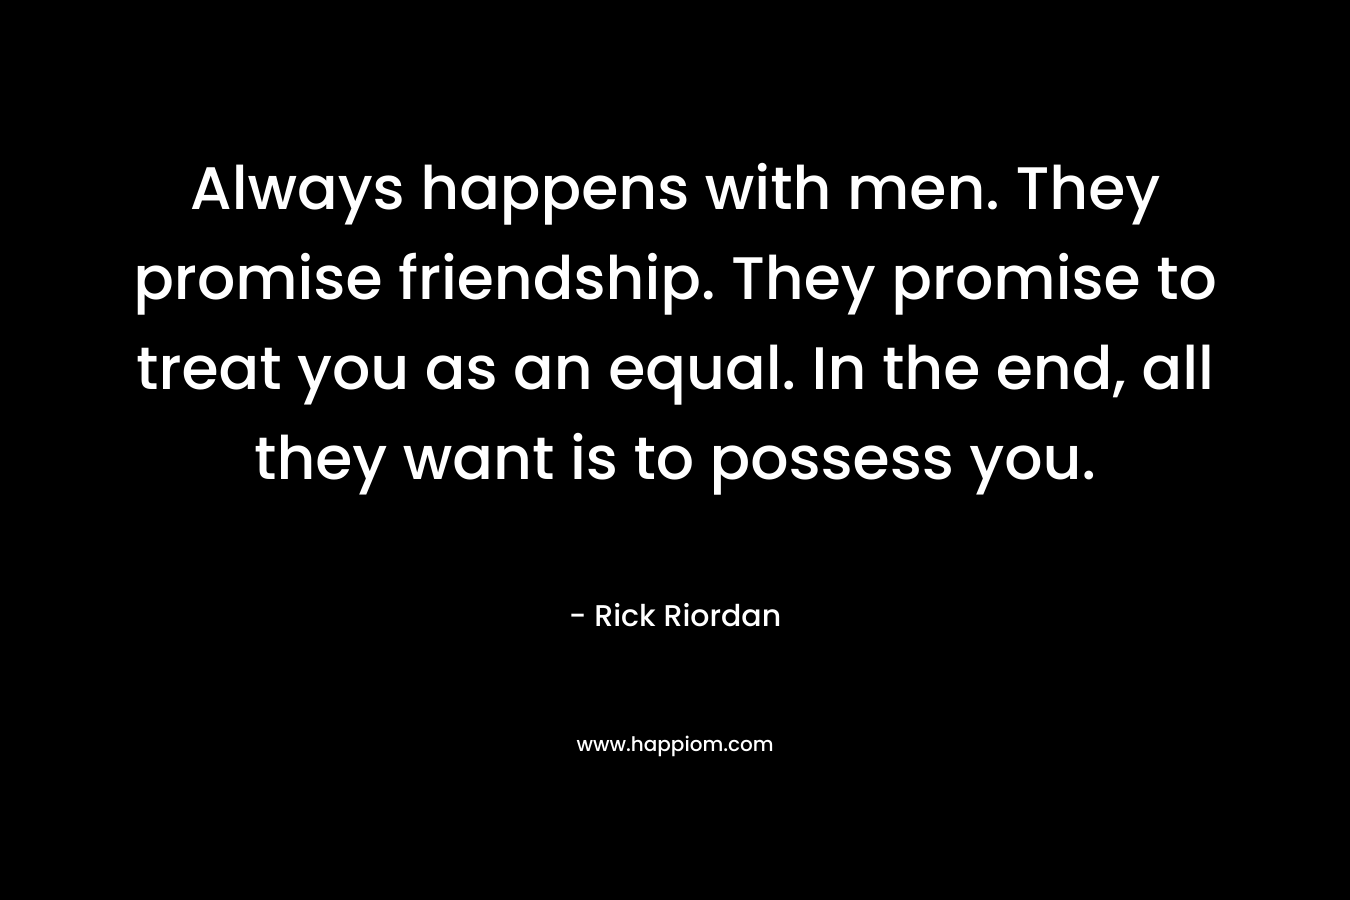 Always happens with men. They promise friendship. They promise to treat you as an equal. In the end, all they want is to possess you.